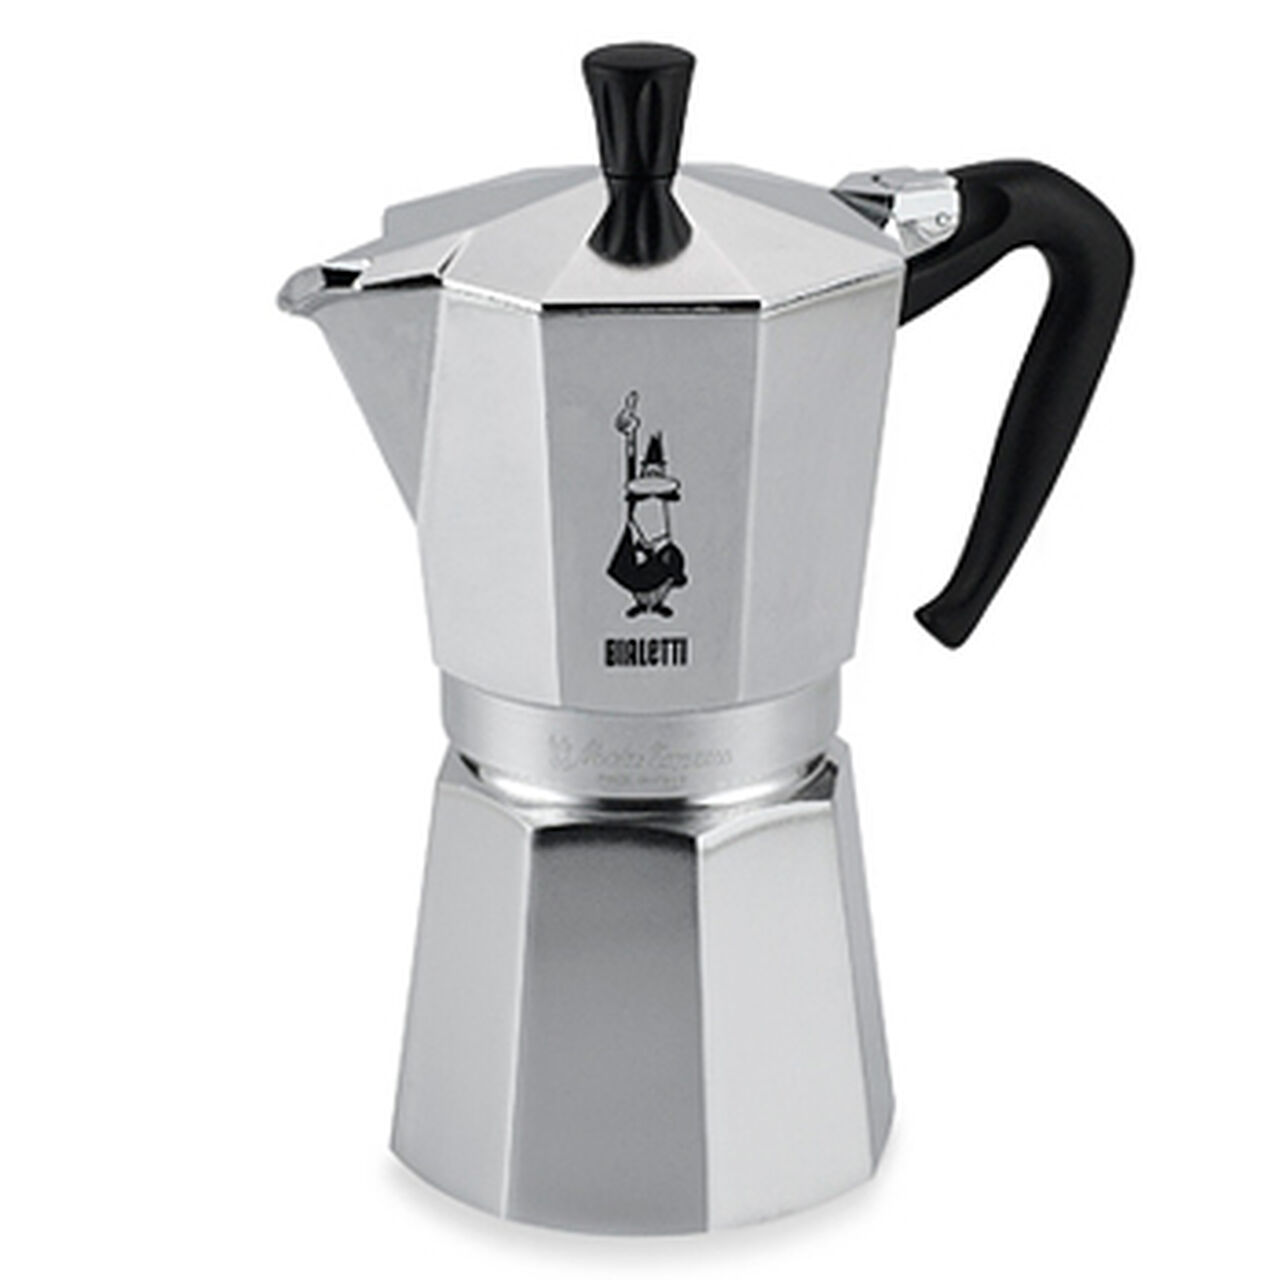 Bialetti Moka Express - 9 Cup Espresso Maker, , large image number 0